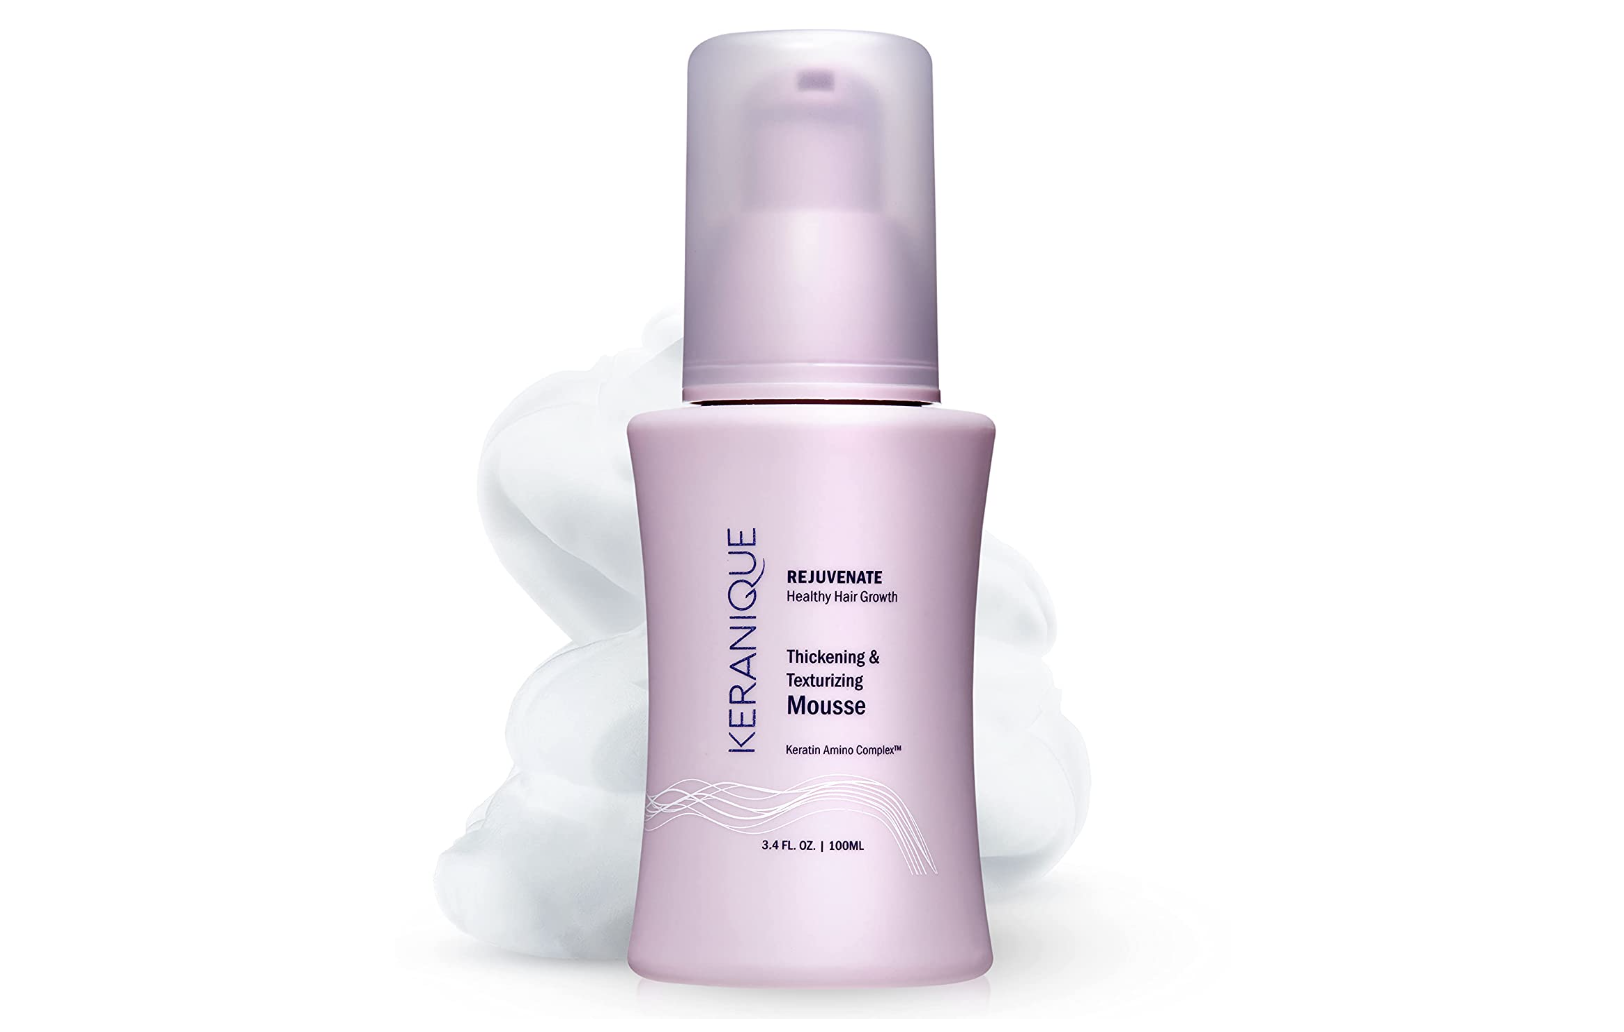 A bottle of the volumizing hair mousse